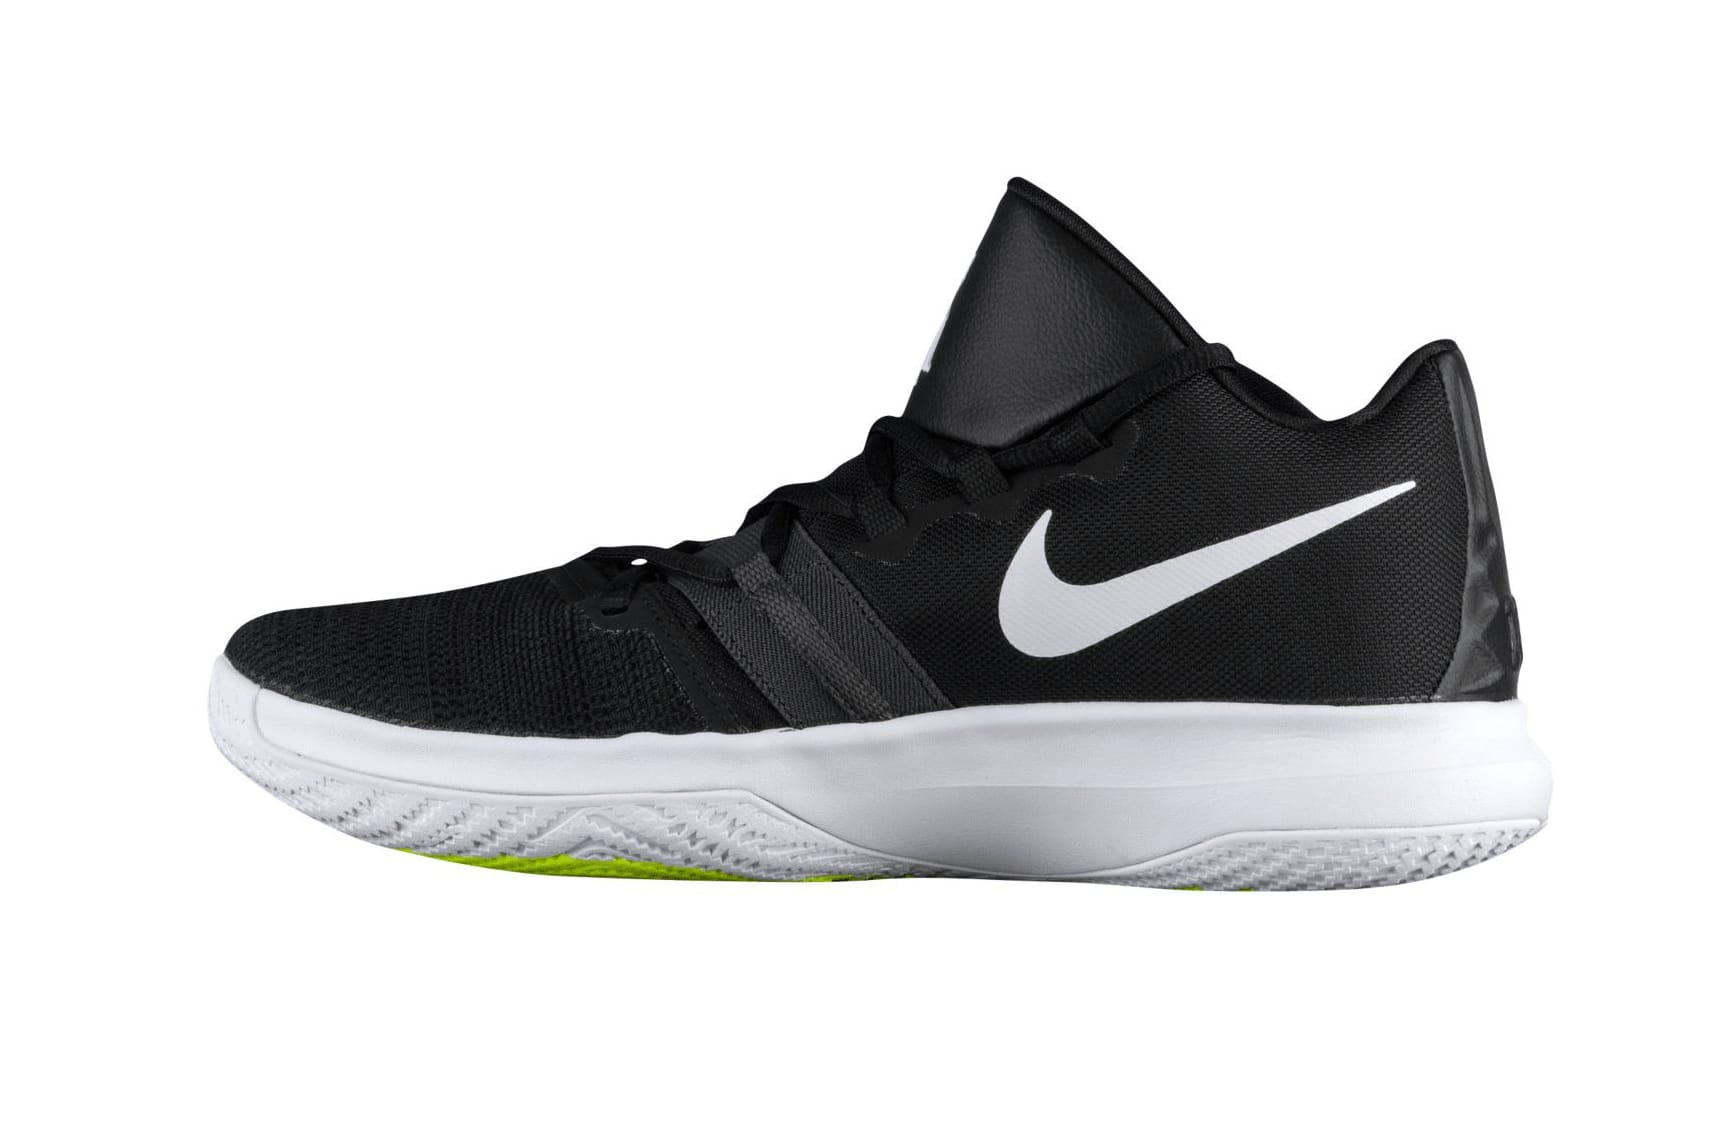 Nike Kyrie Flytrap in Black and White 